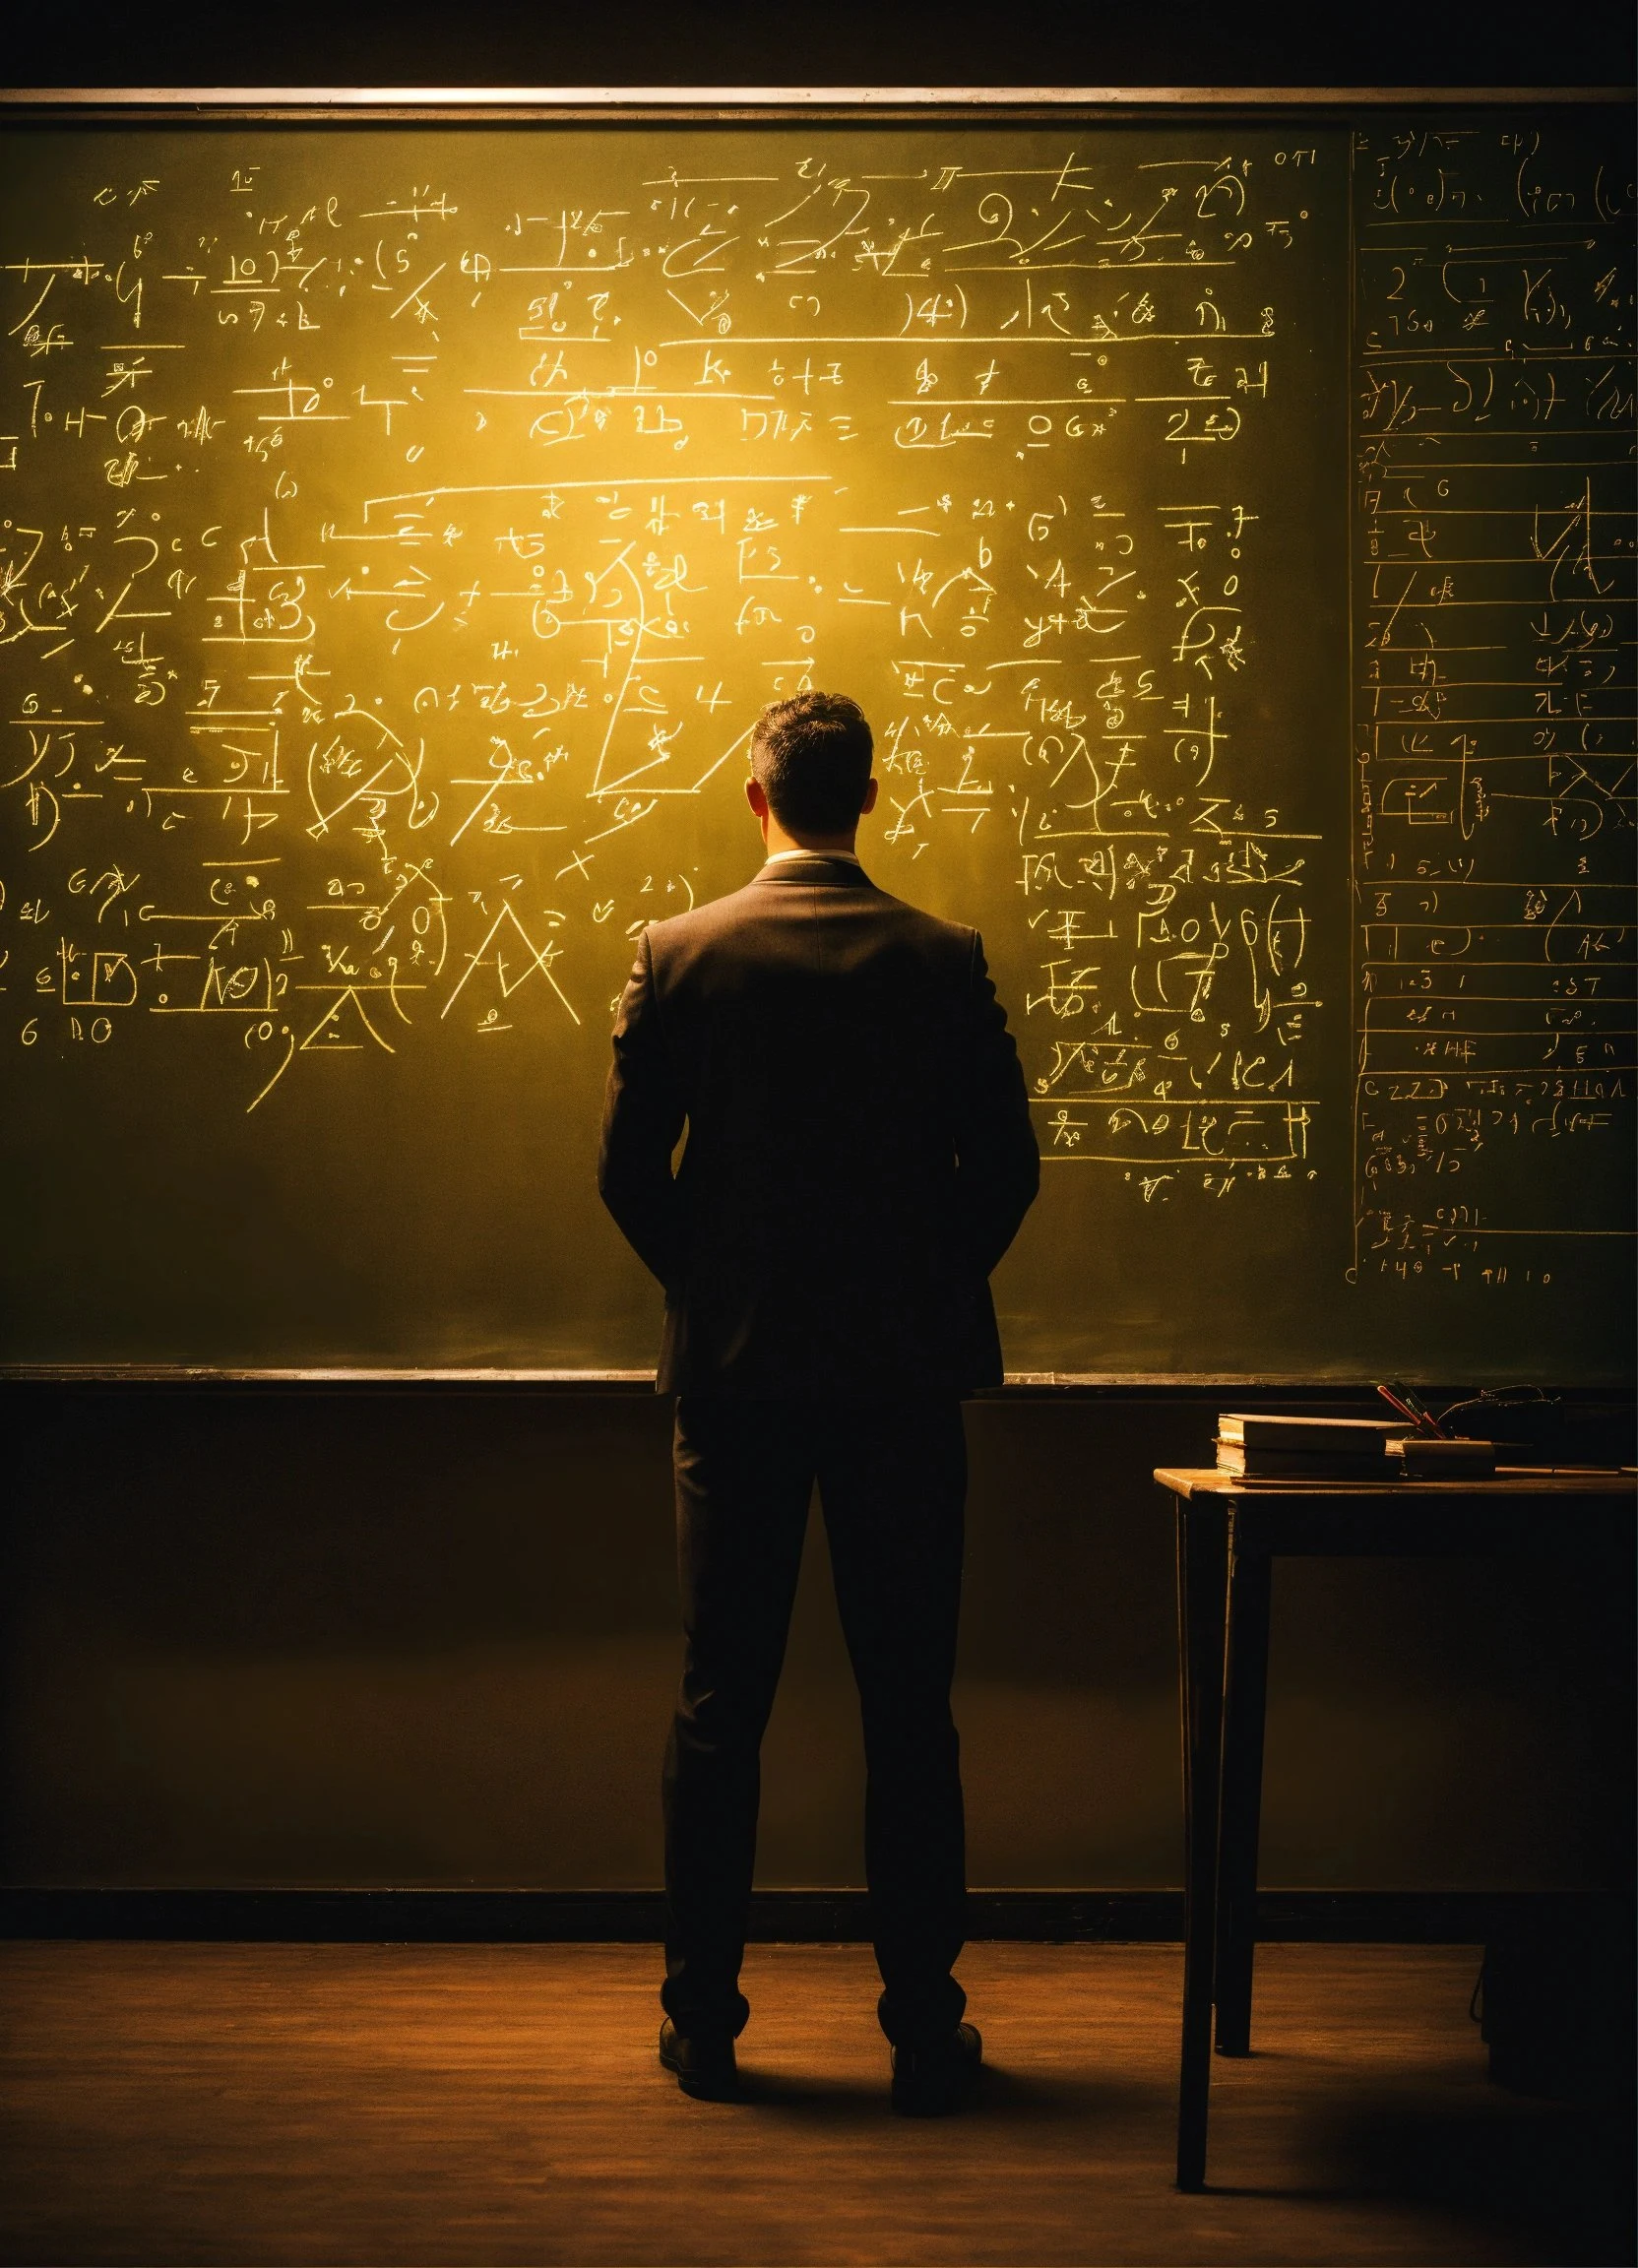 30 Interesting Facts About Cryptographic Mathematics